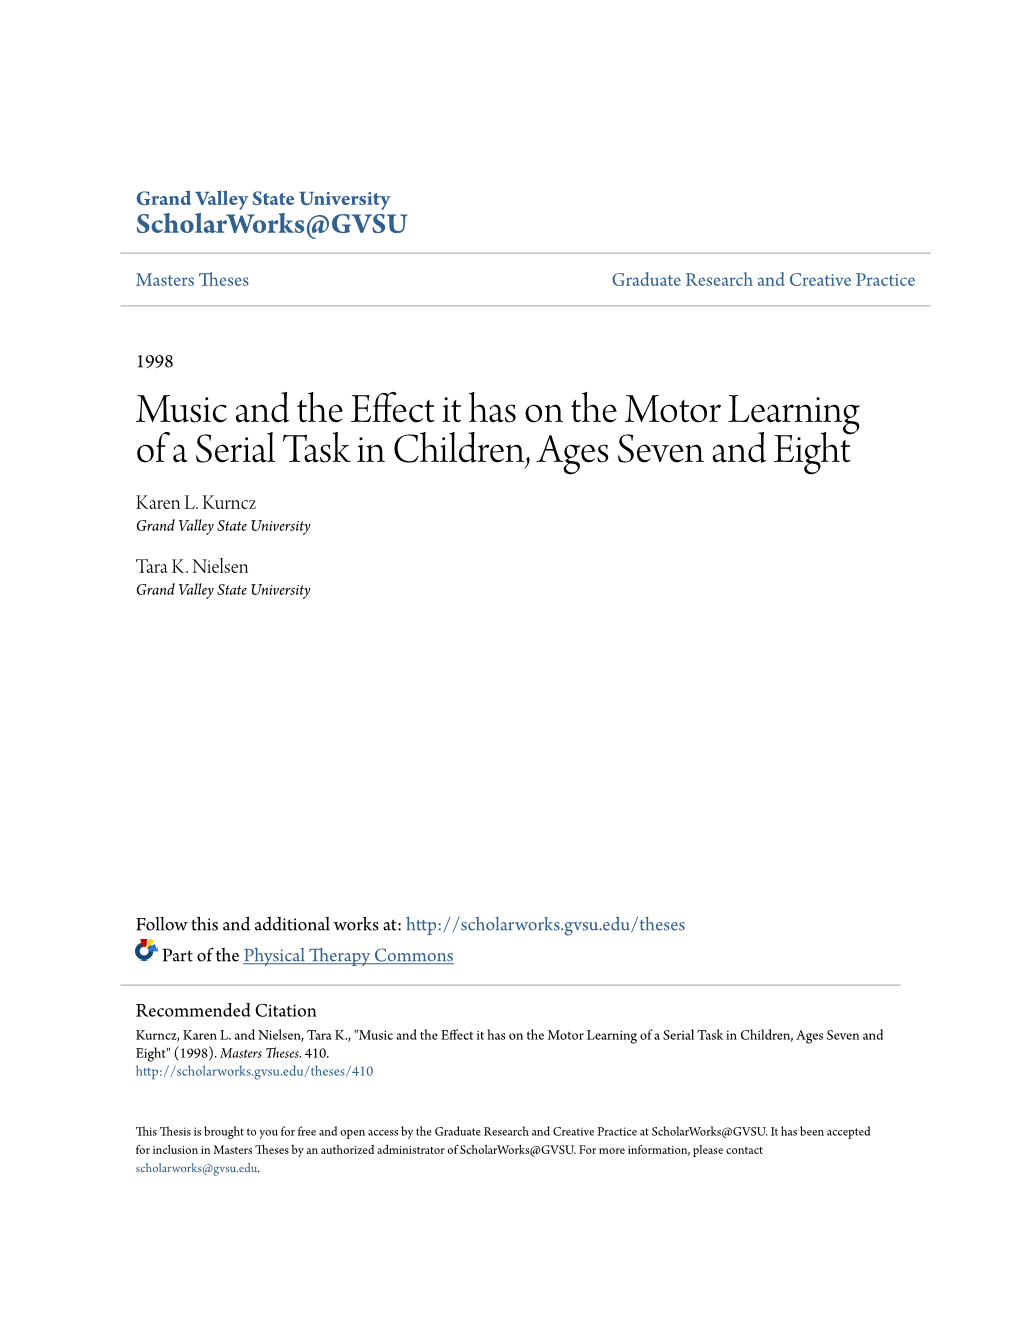 Music and the Effect It Has on the Motor Learning of a Serial Task in Children, Ages Seven and Eight Karen L